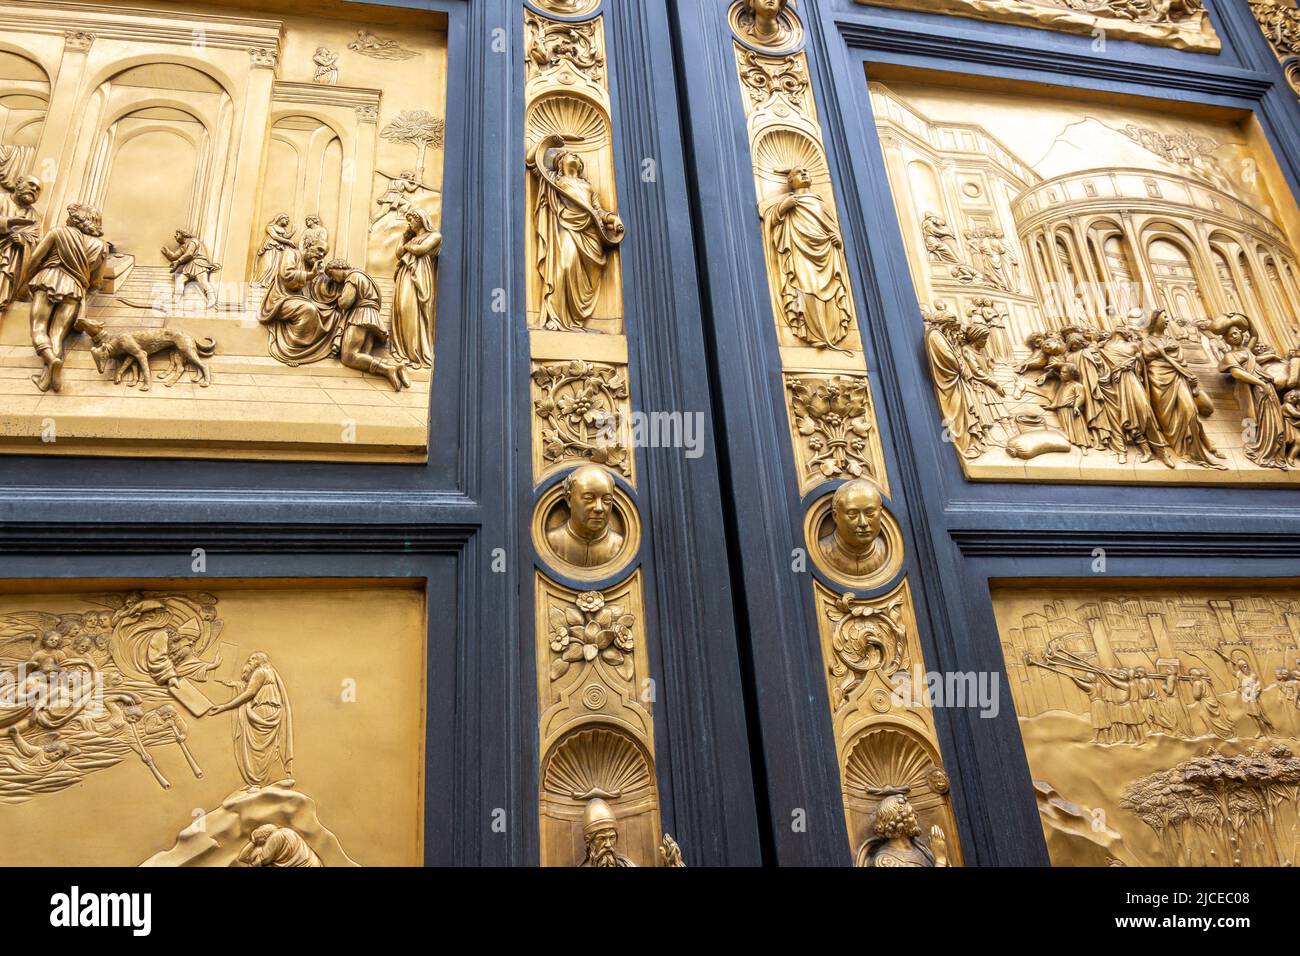 'Gates of Paradise' on east entry of the Bapistry of Cattedrale di Santa Maria del Fiore (Duomo), Florence (Firenze), Tuscany Region, Italy Stock Photo